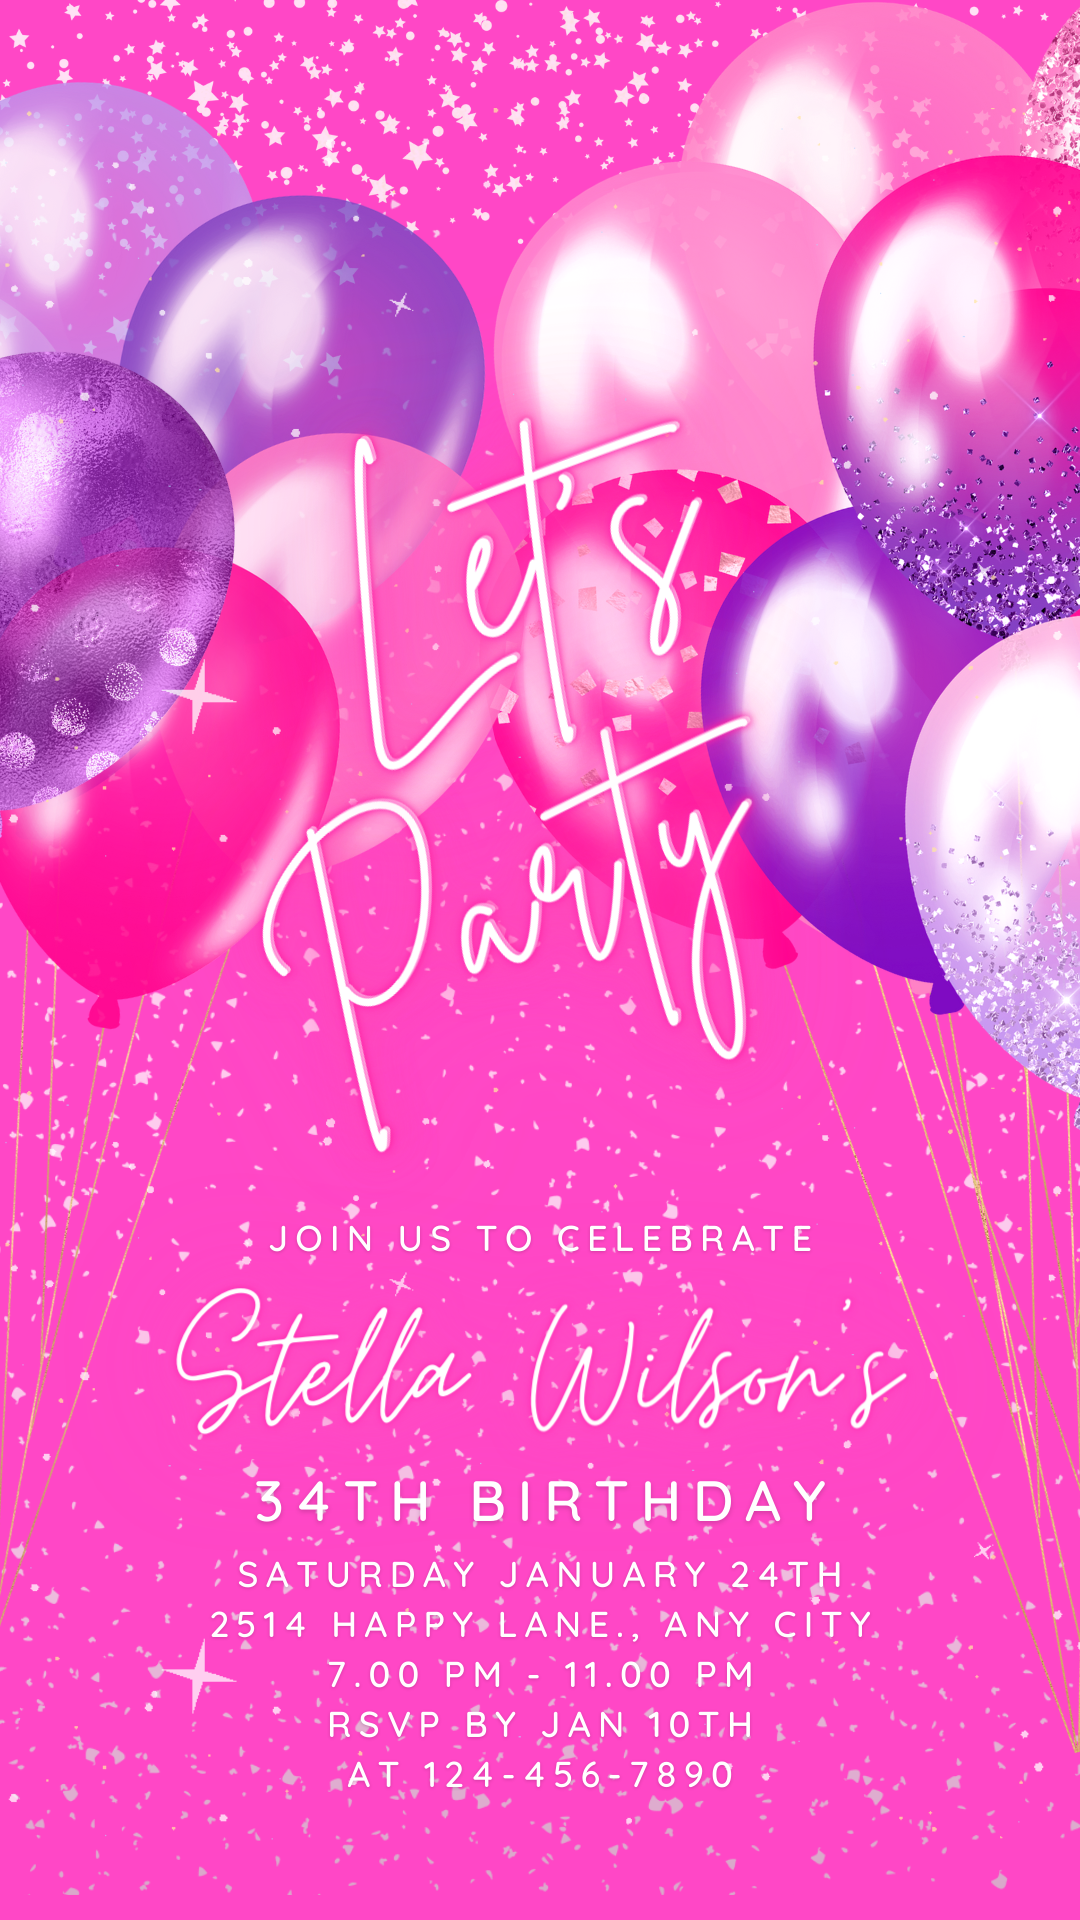 Animated Pink Party Invite for any Event Celebration, Editable Video Template, Birthday invitation for any Age| Digital E-vite